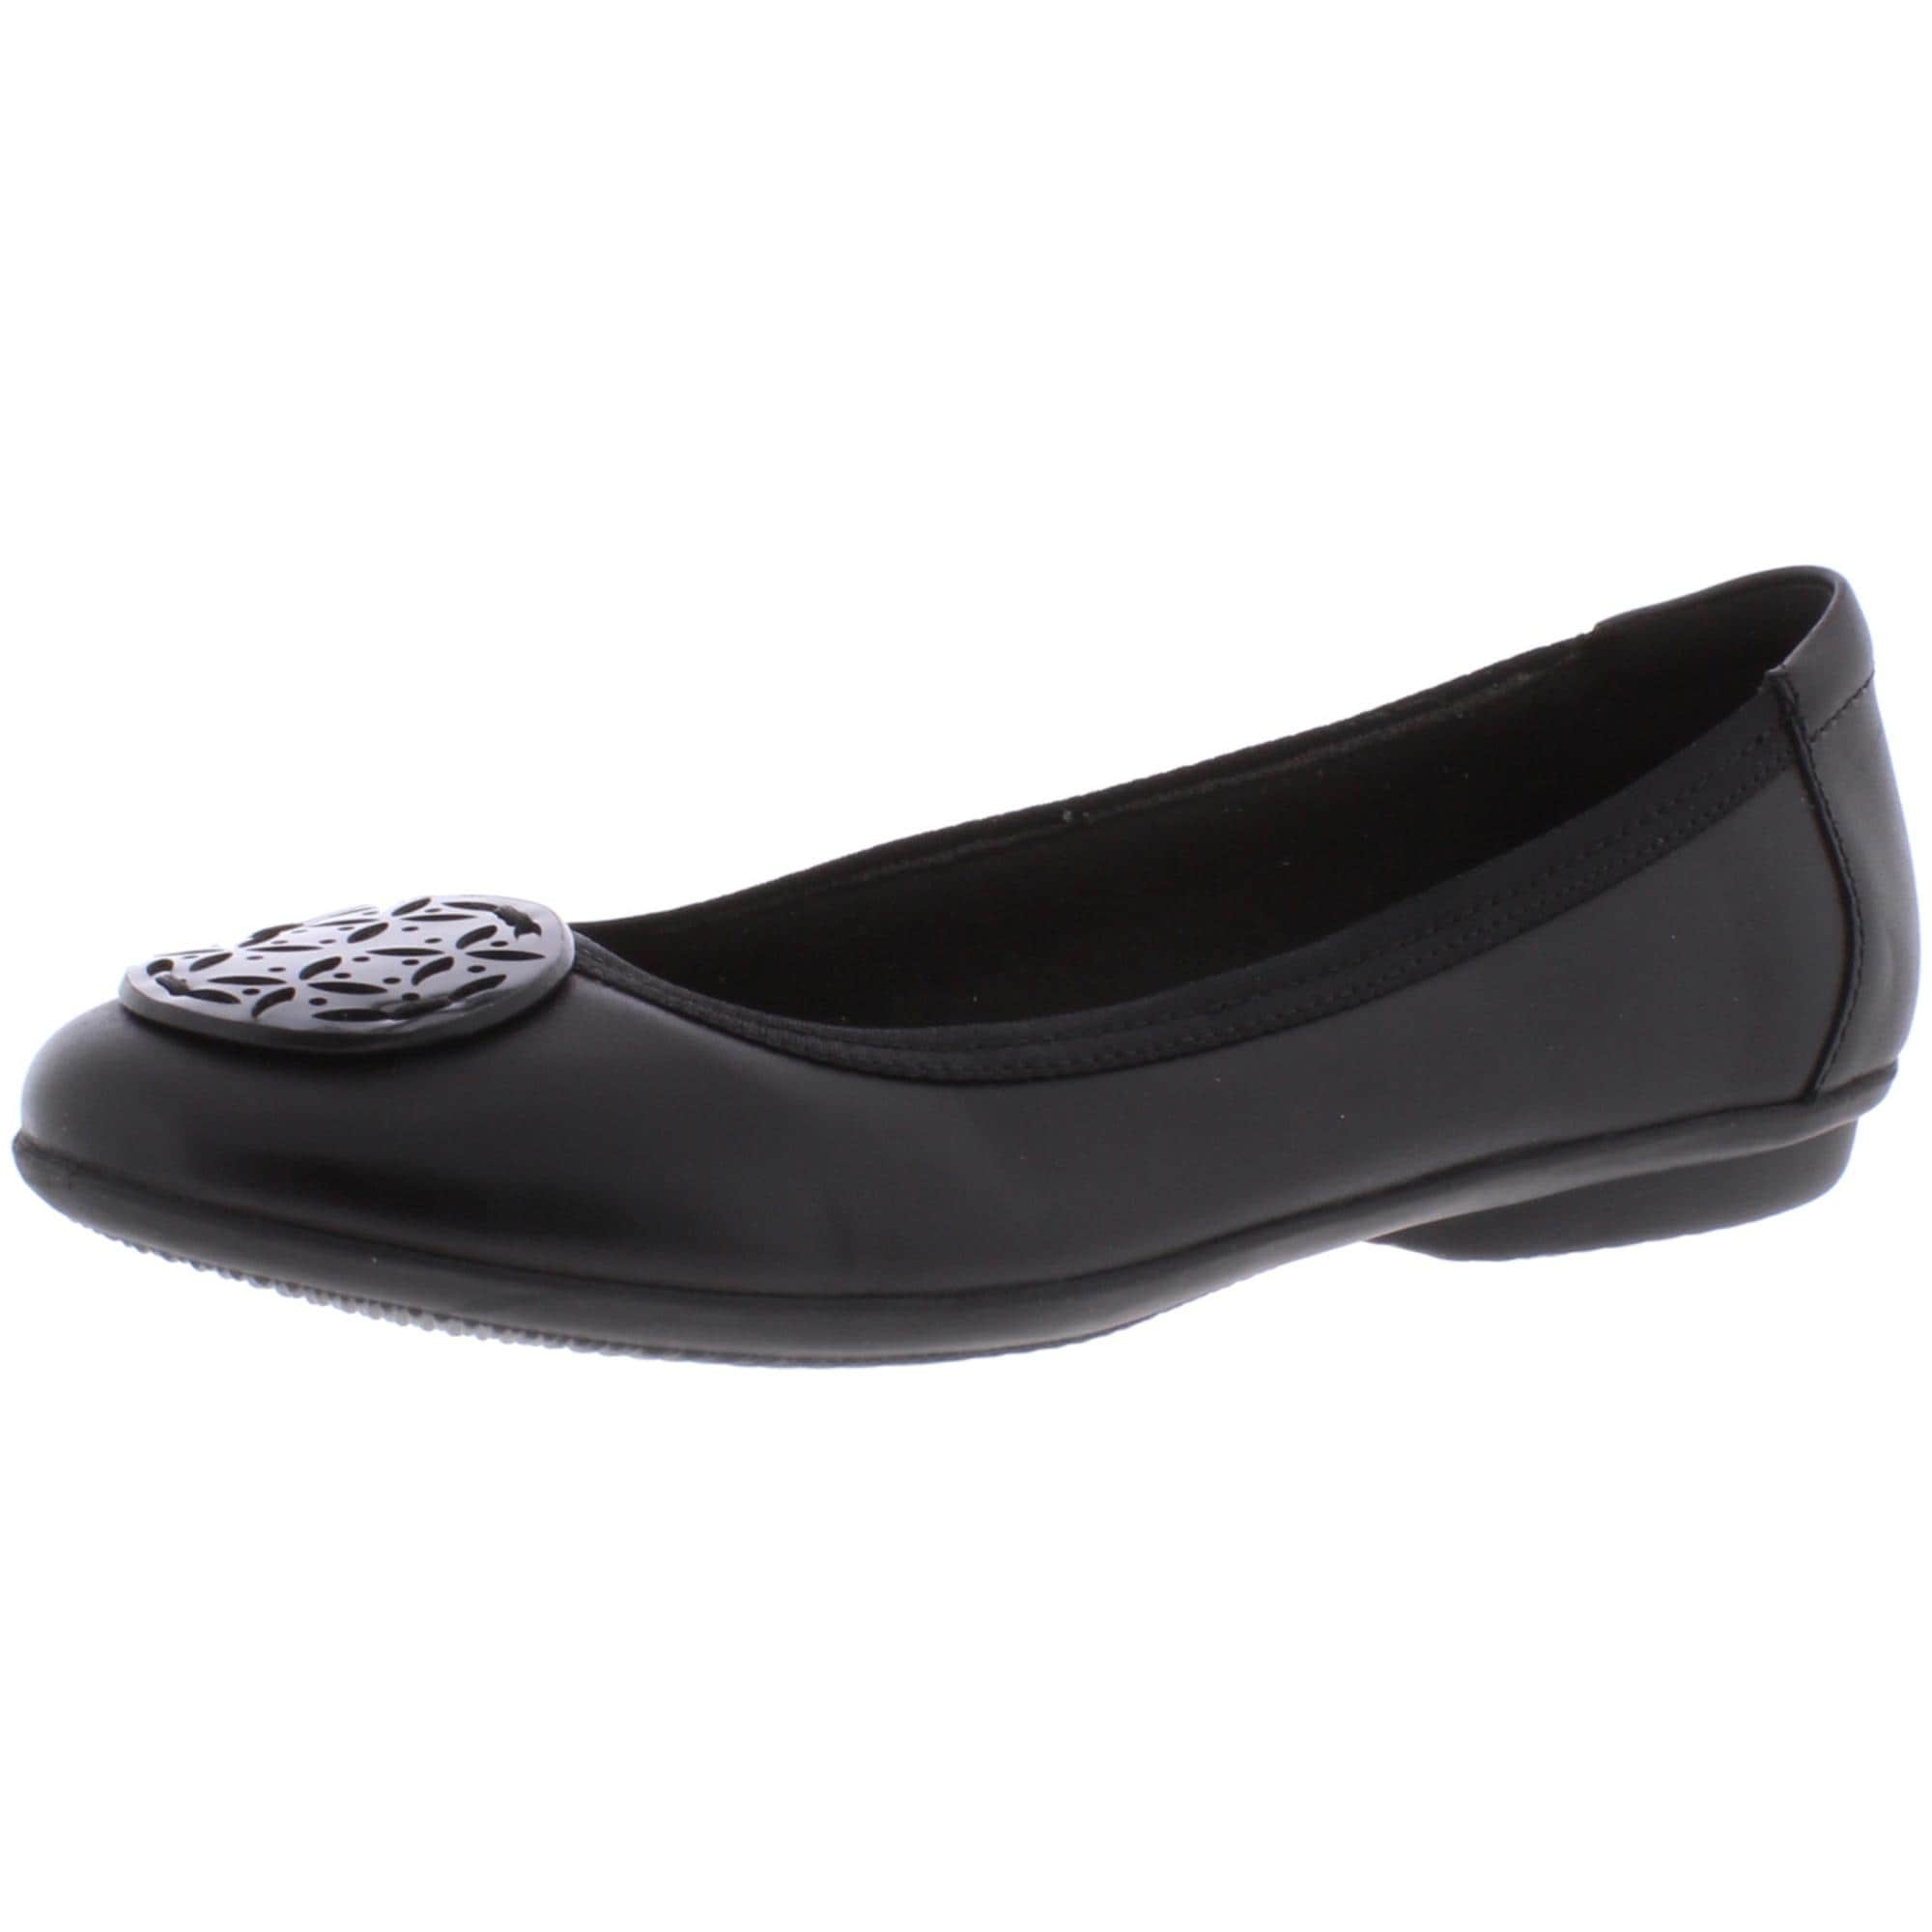 clarks pointed toe flats